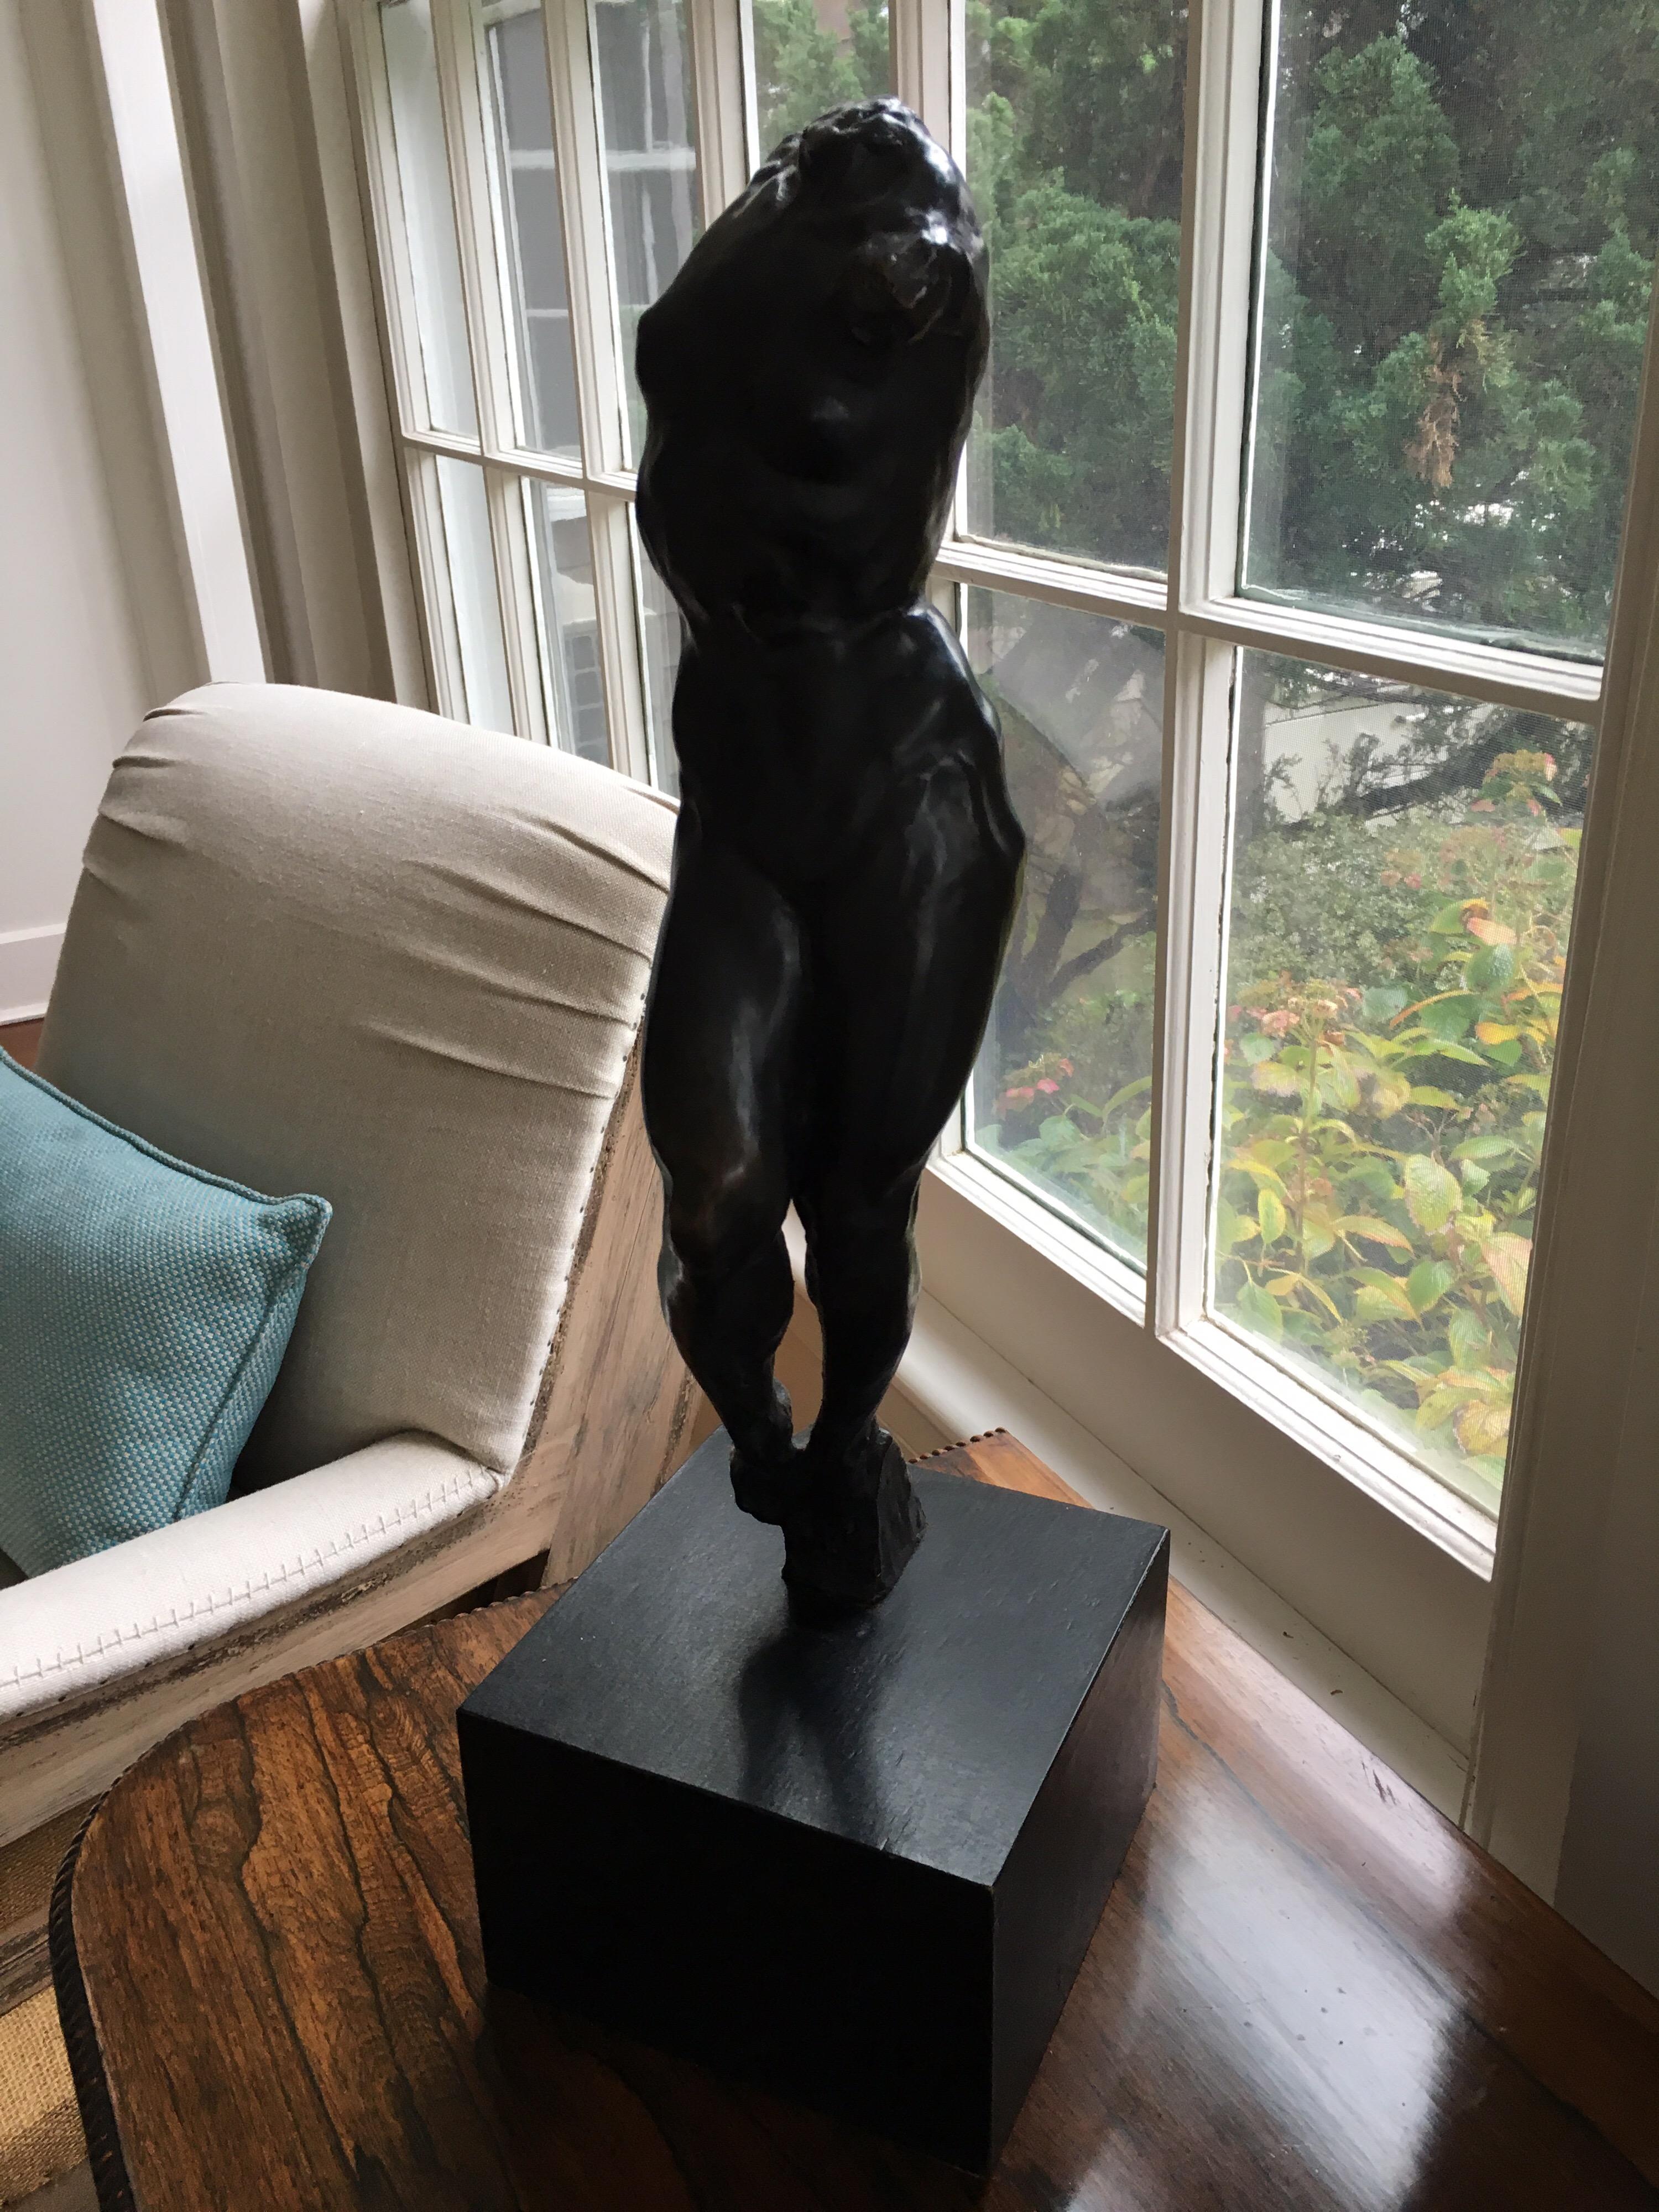 Gary Weisman (American, b. 1952)
Patinated bronze on wood plinth
Overall dimensions: 22” H x 7” W x 7” D
Sculpture: 17.5